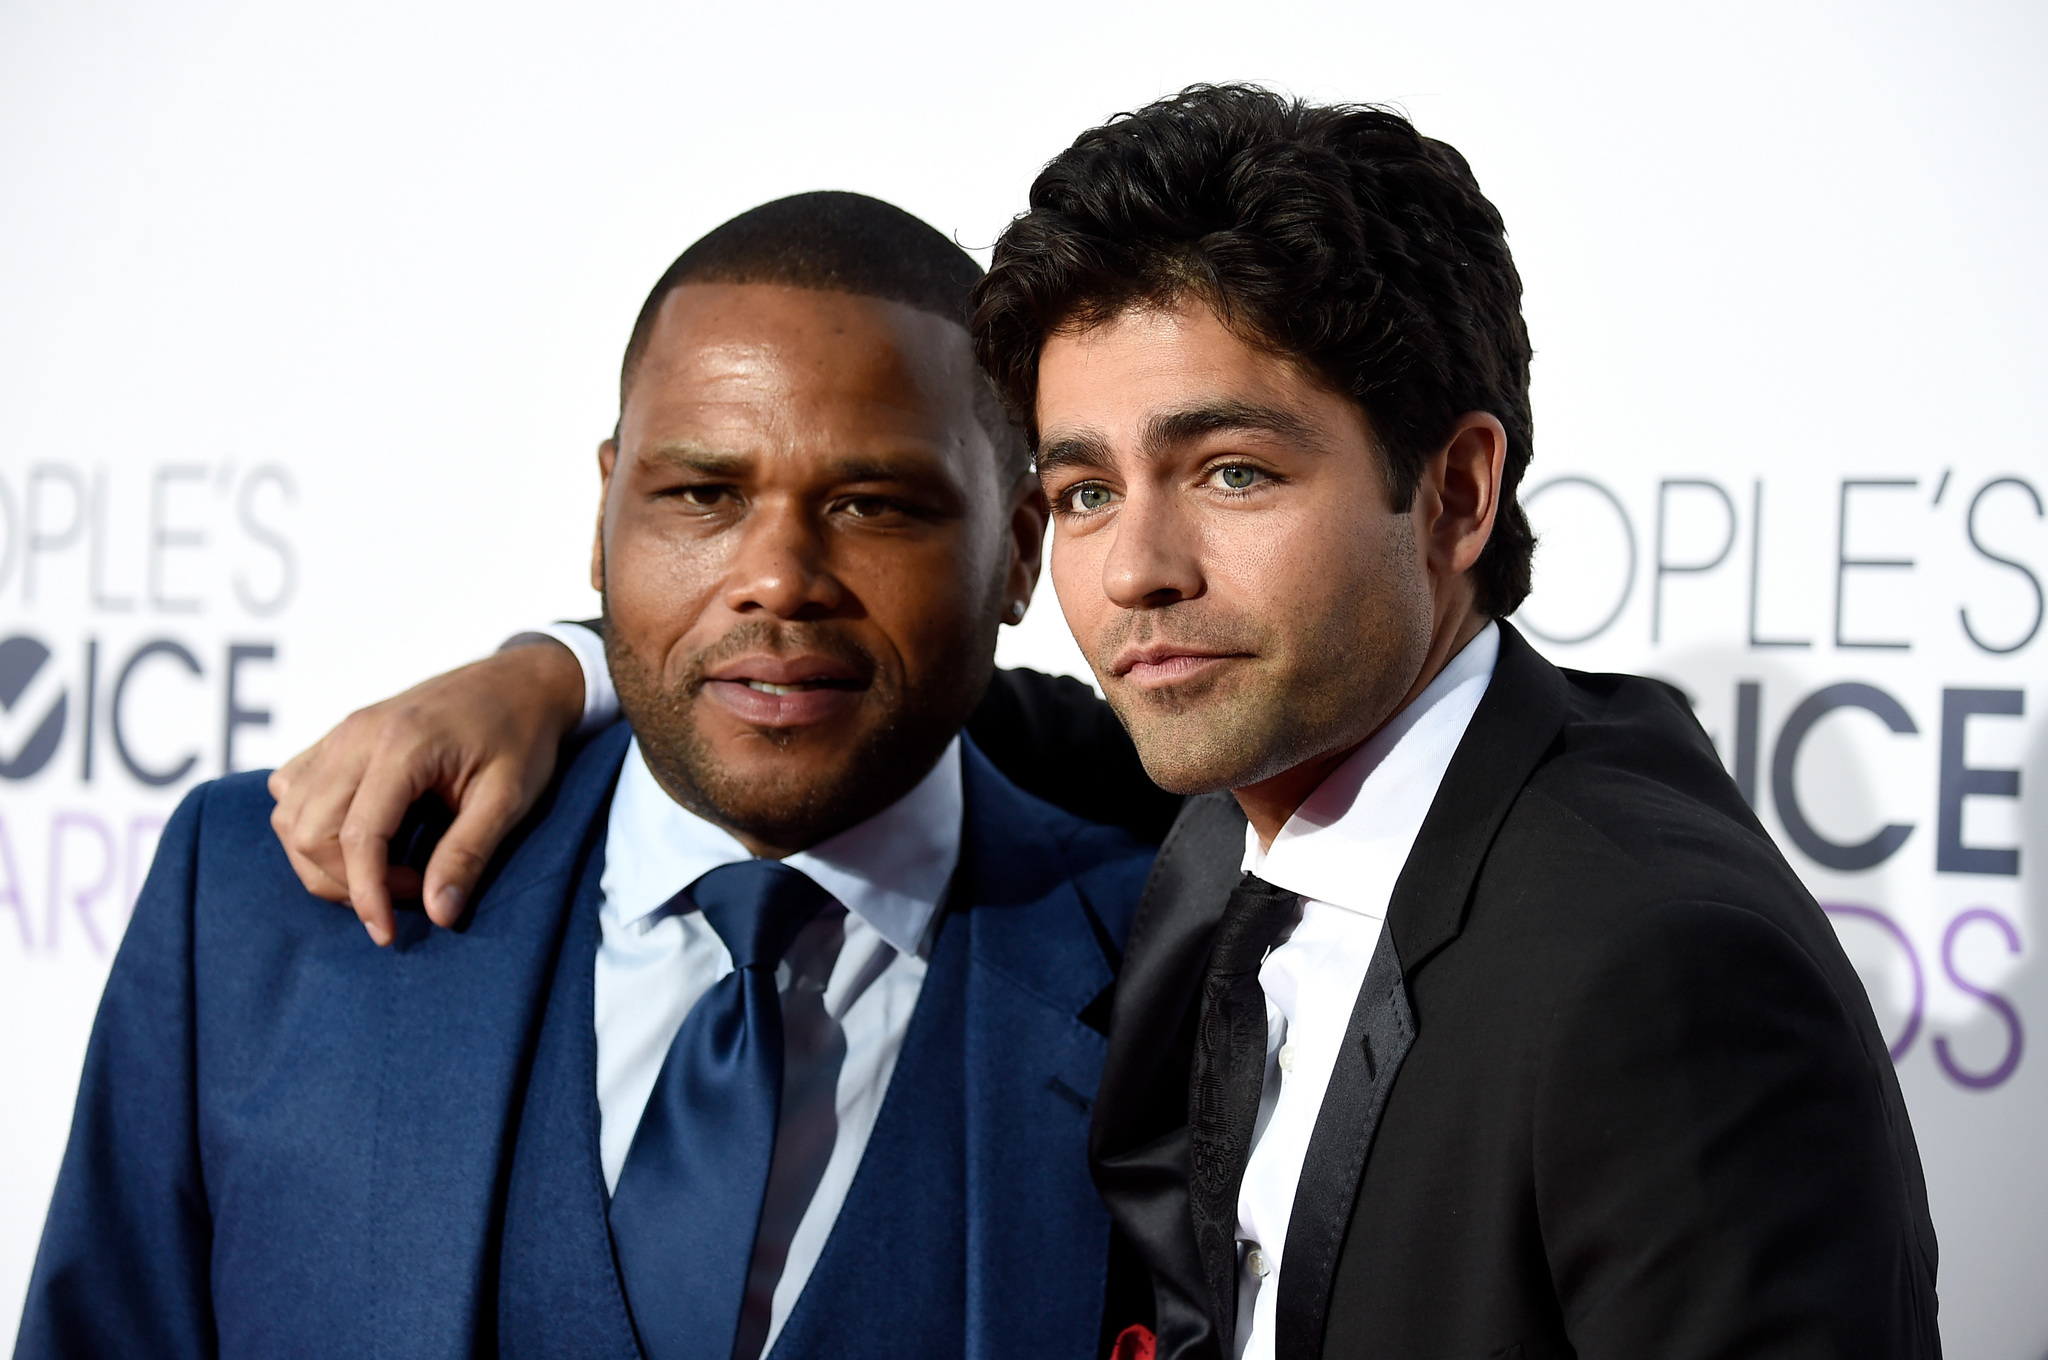 Adrian Grenier and Anthony Anderson